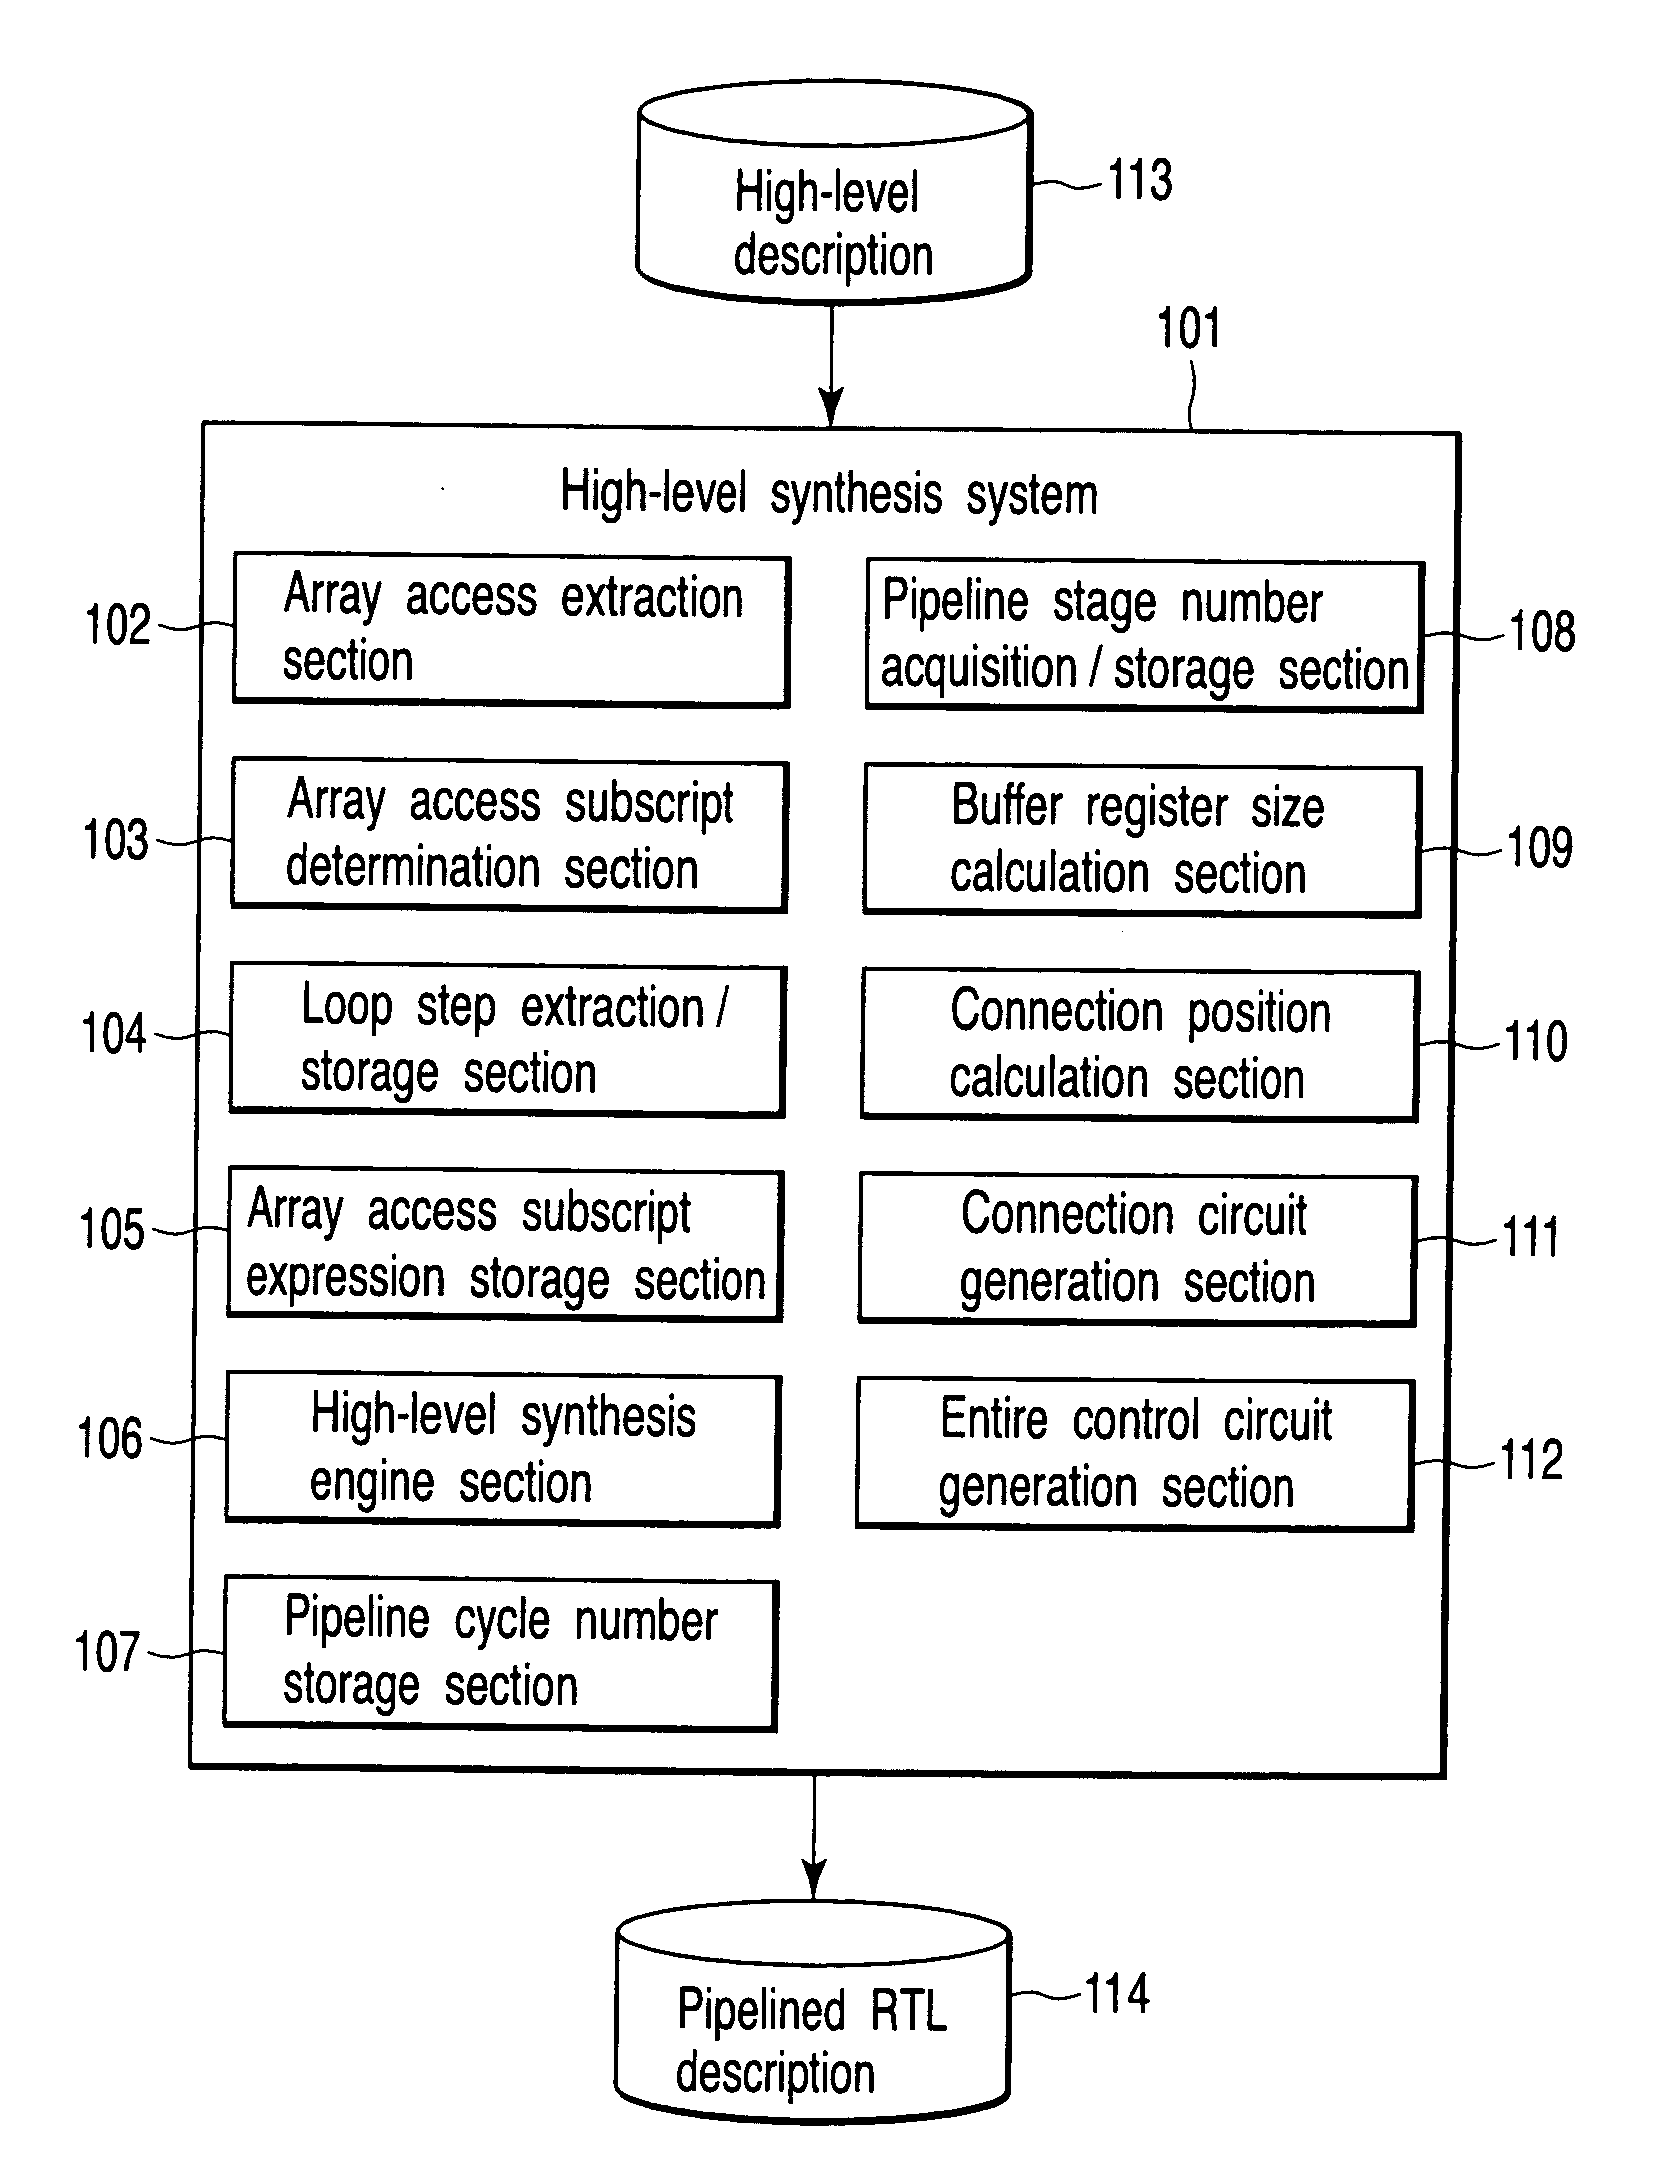 Pipeline high-level synthesis system and method